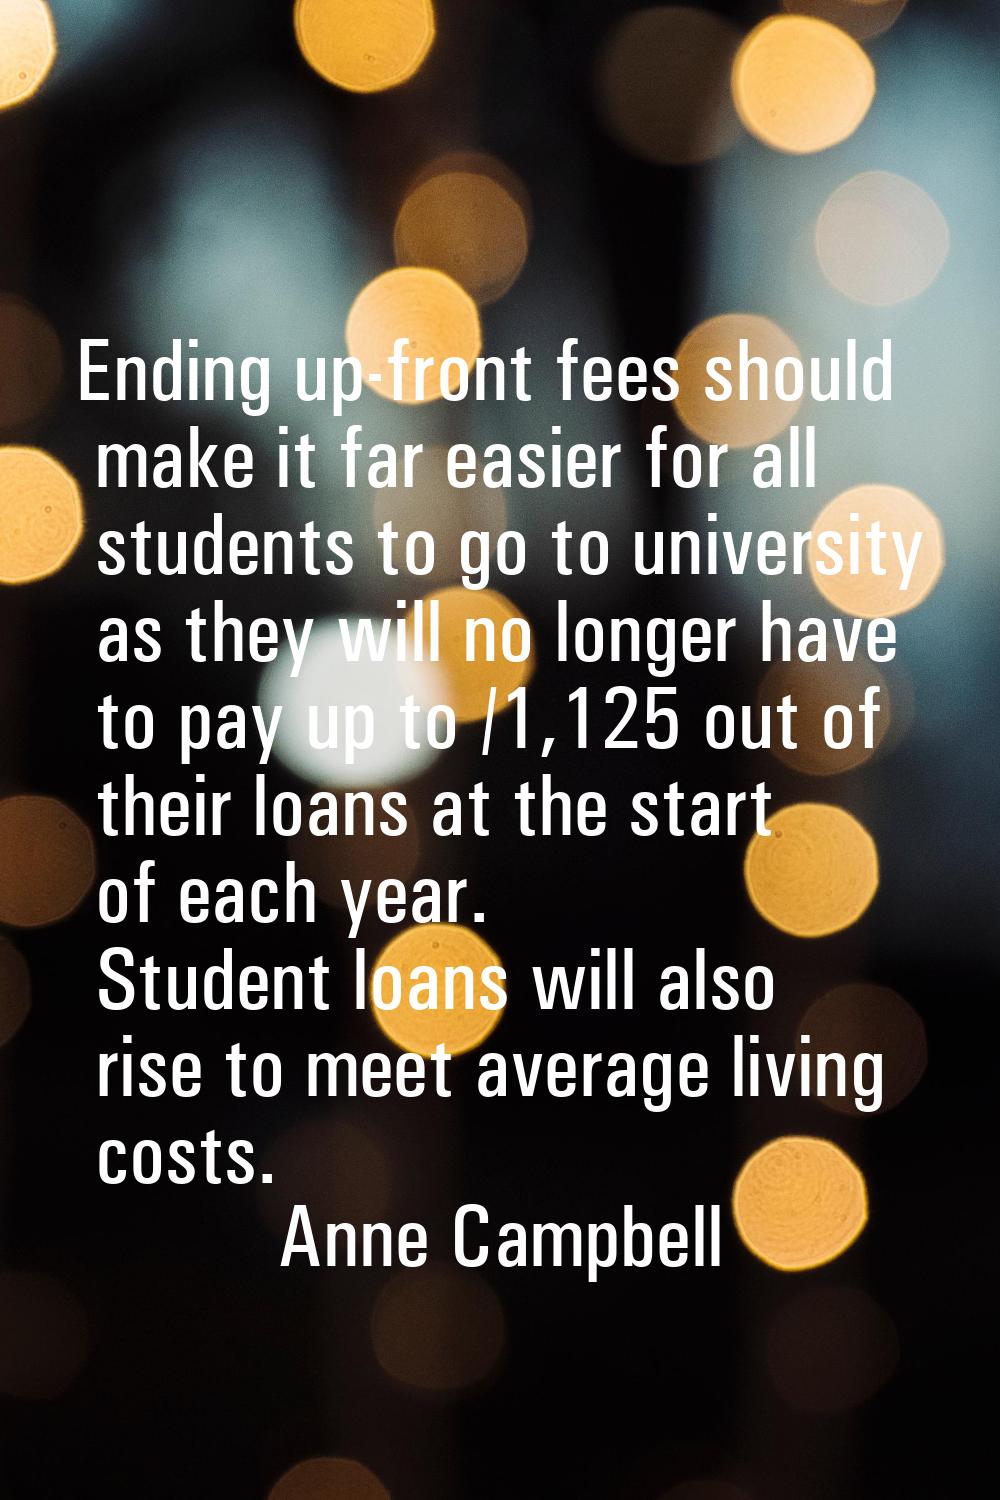 Ending up-front fees should make it far easier for all students to go to university as they will no